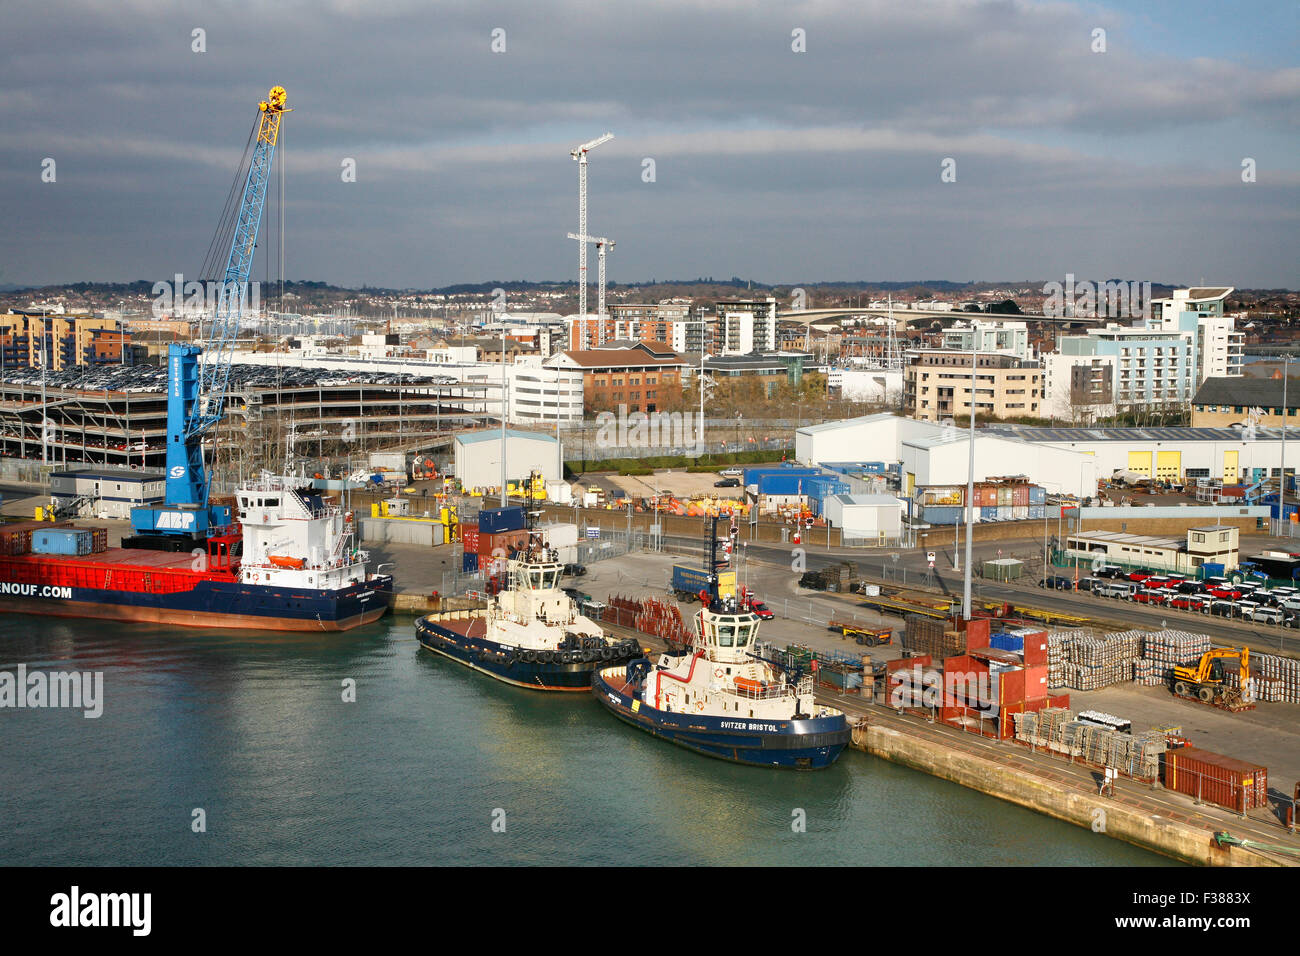 Tug Boats High Resolution Stock Photography and Images - Alamy